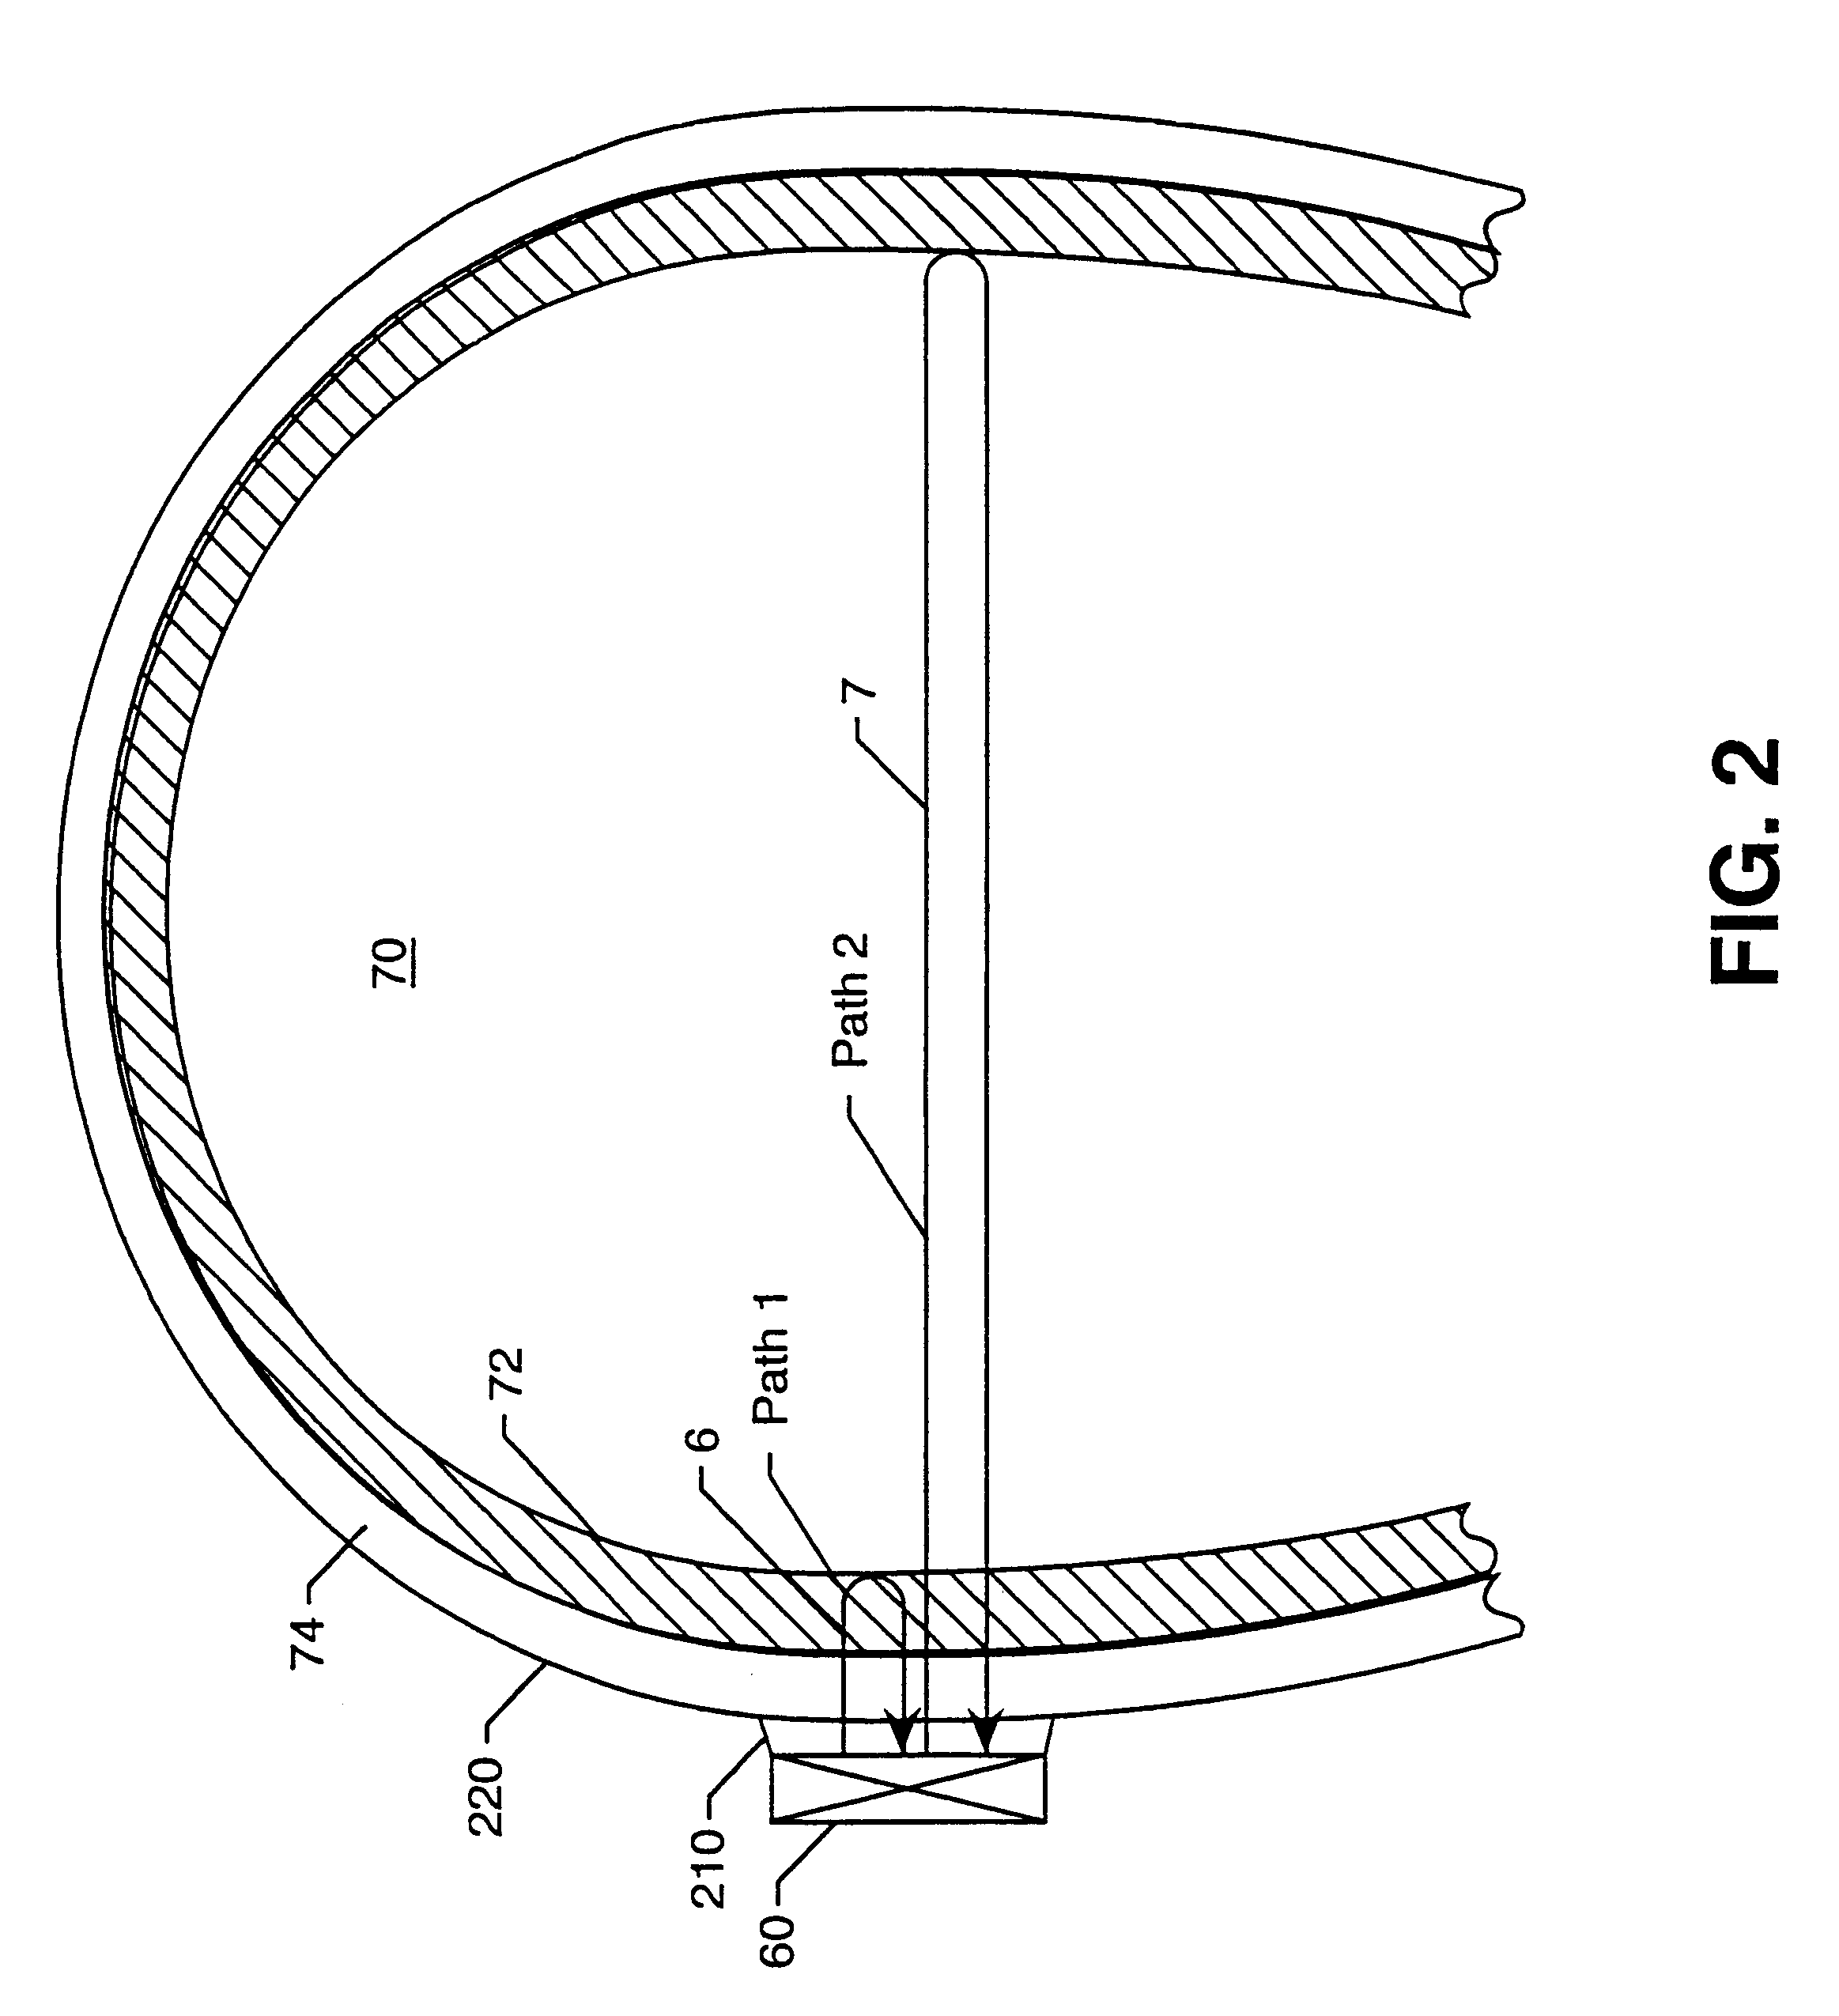 Method and apparatus for assessment of changes in intracranial pressure